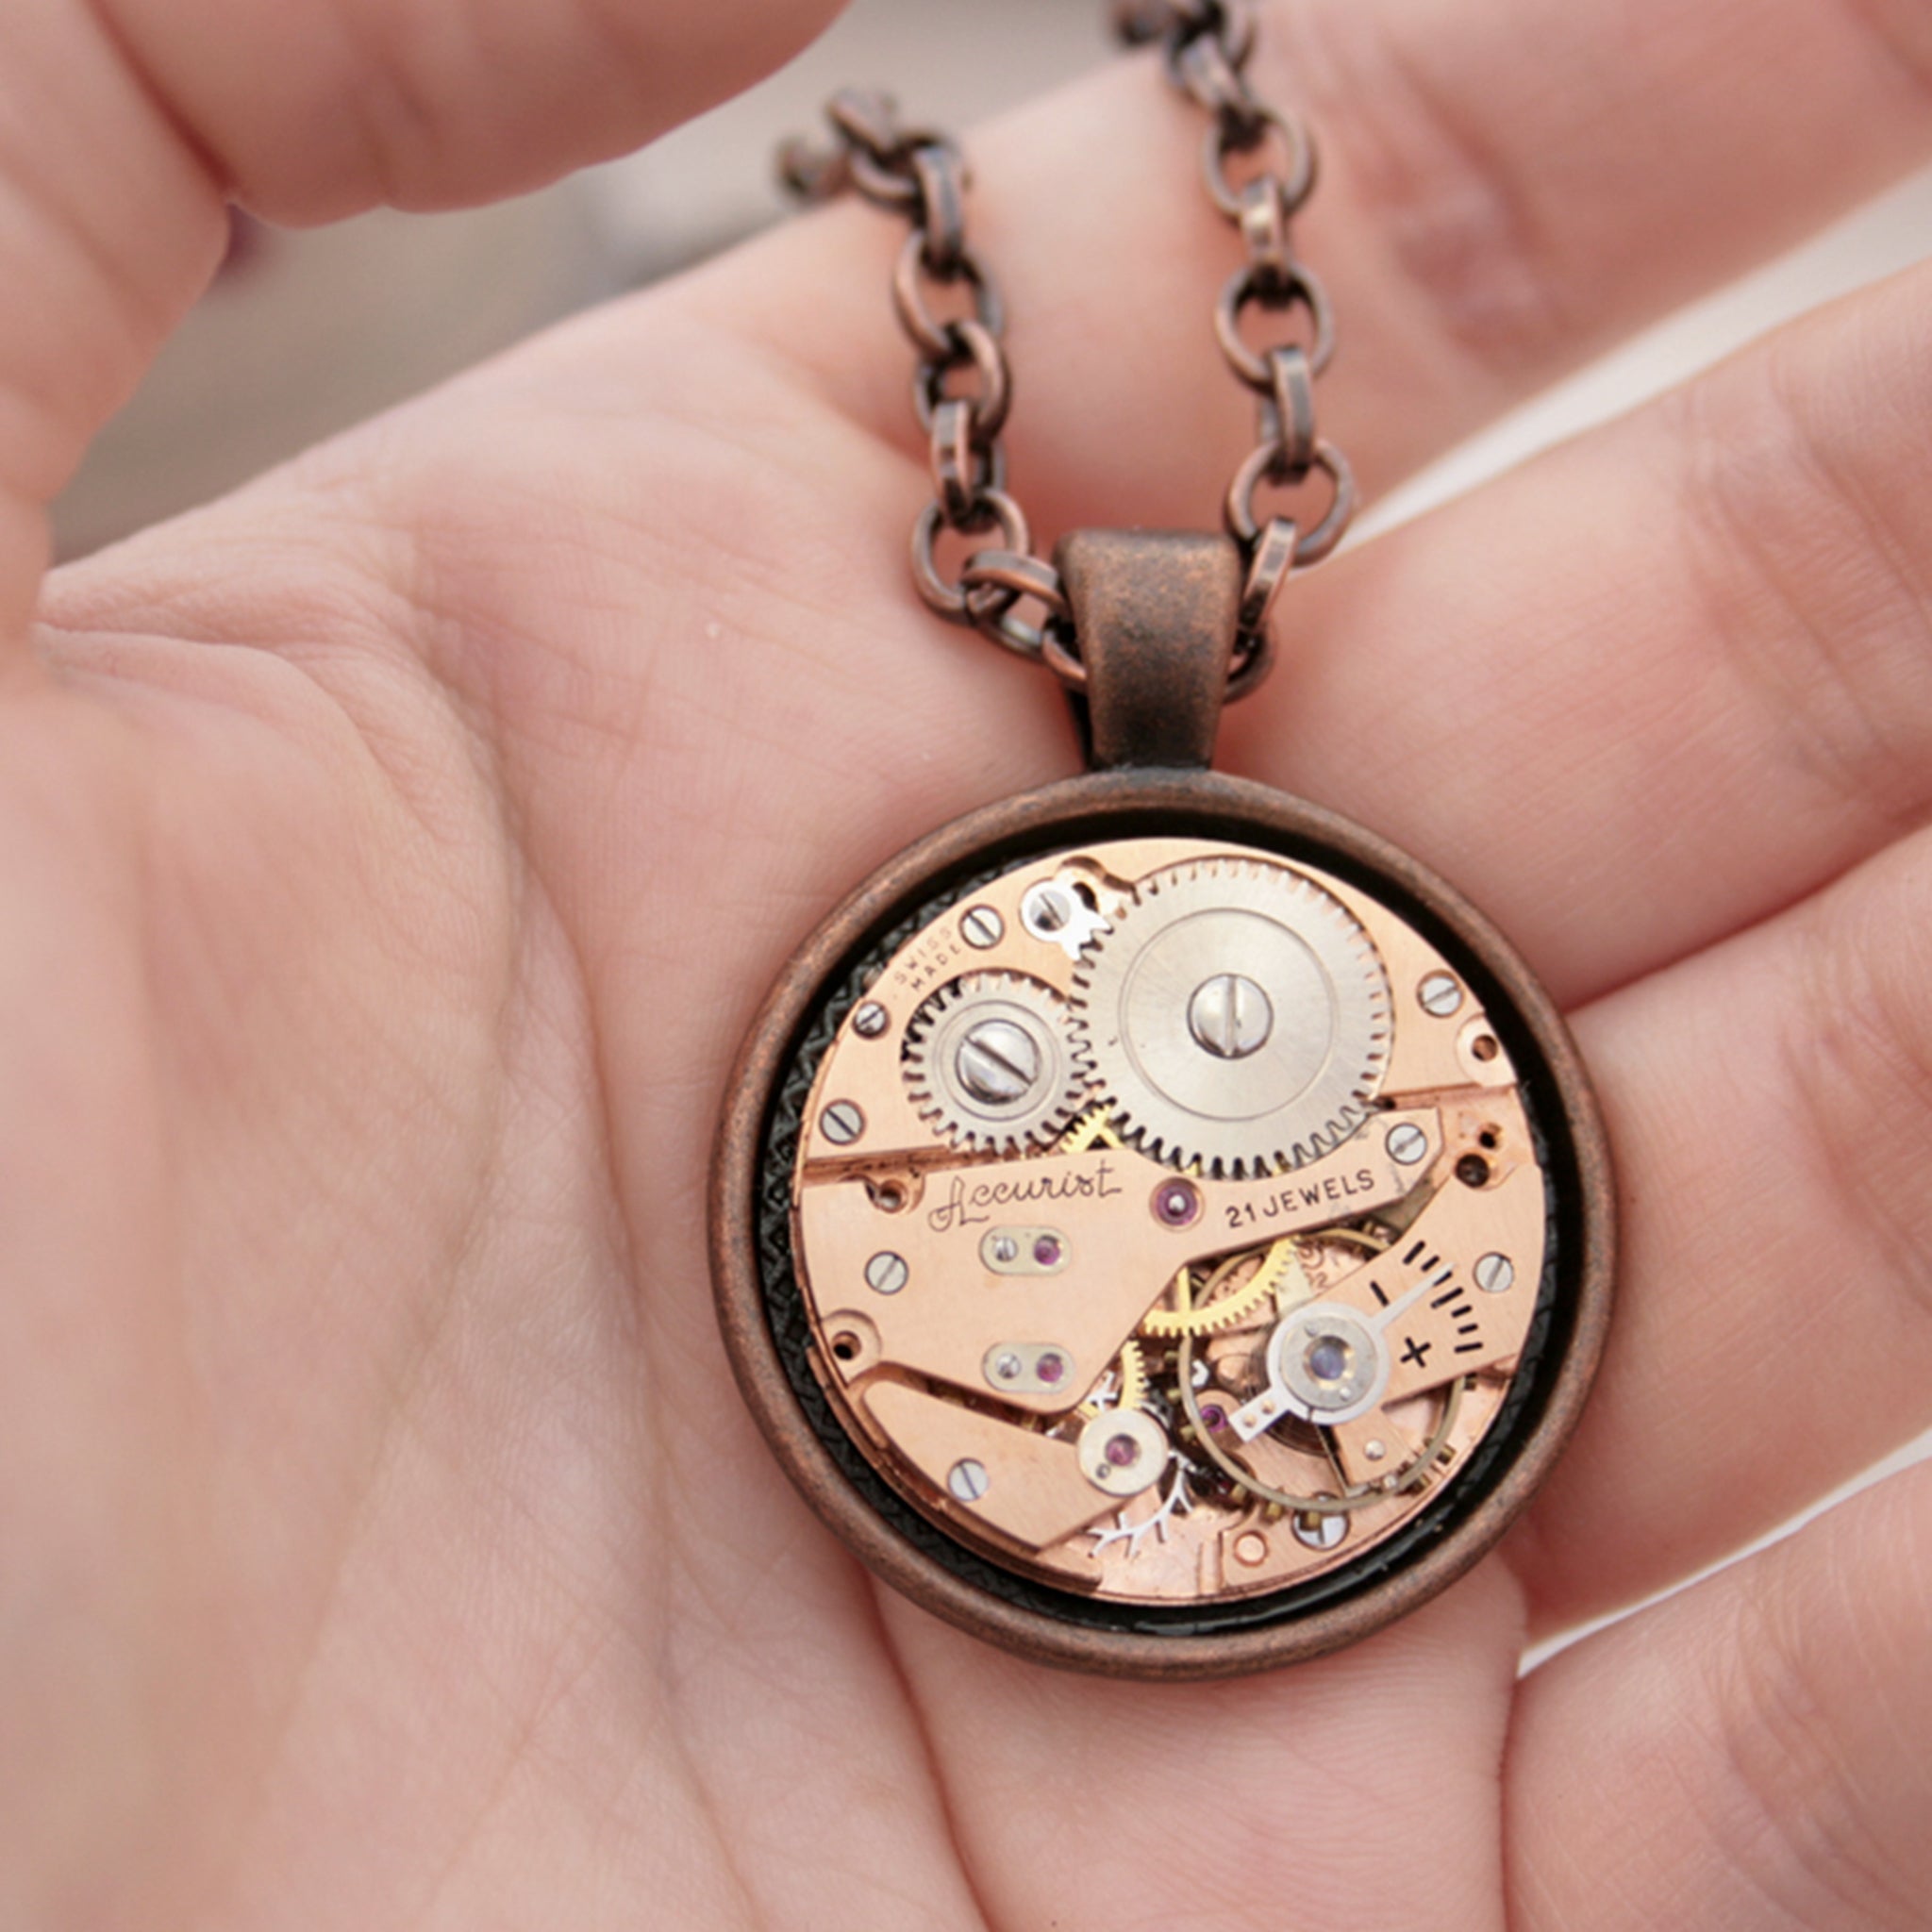 Copper Pendant Necklace in Steampunk Style with Watch Mechanism